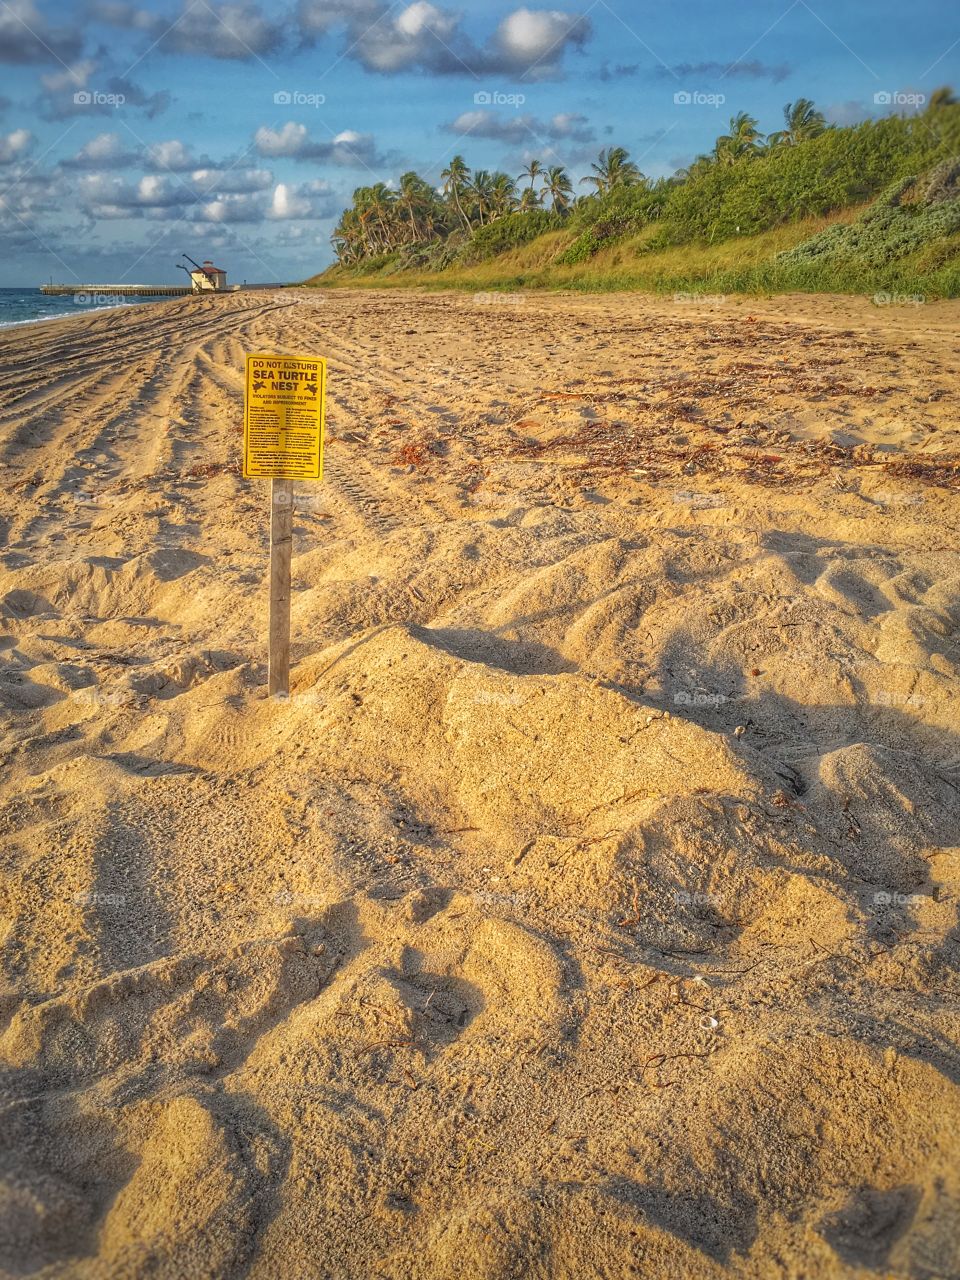 Sea turtle nest on beach with warning sign